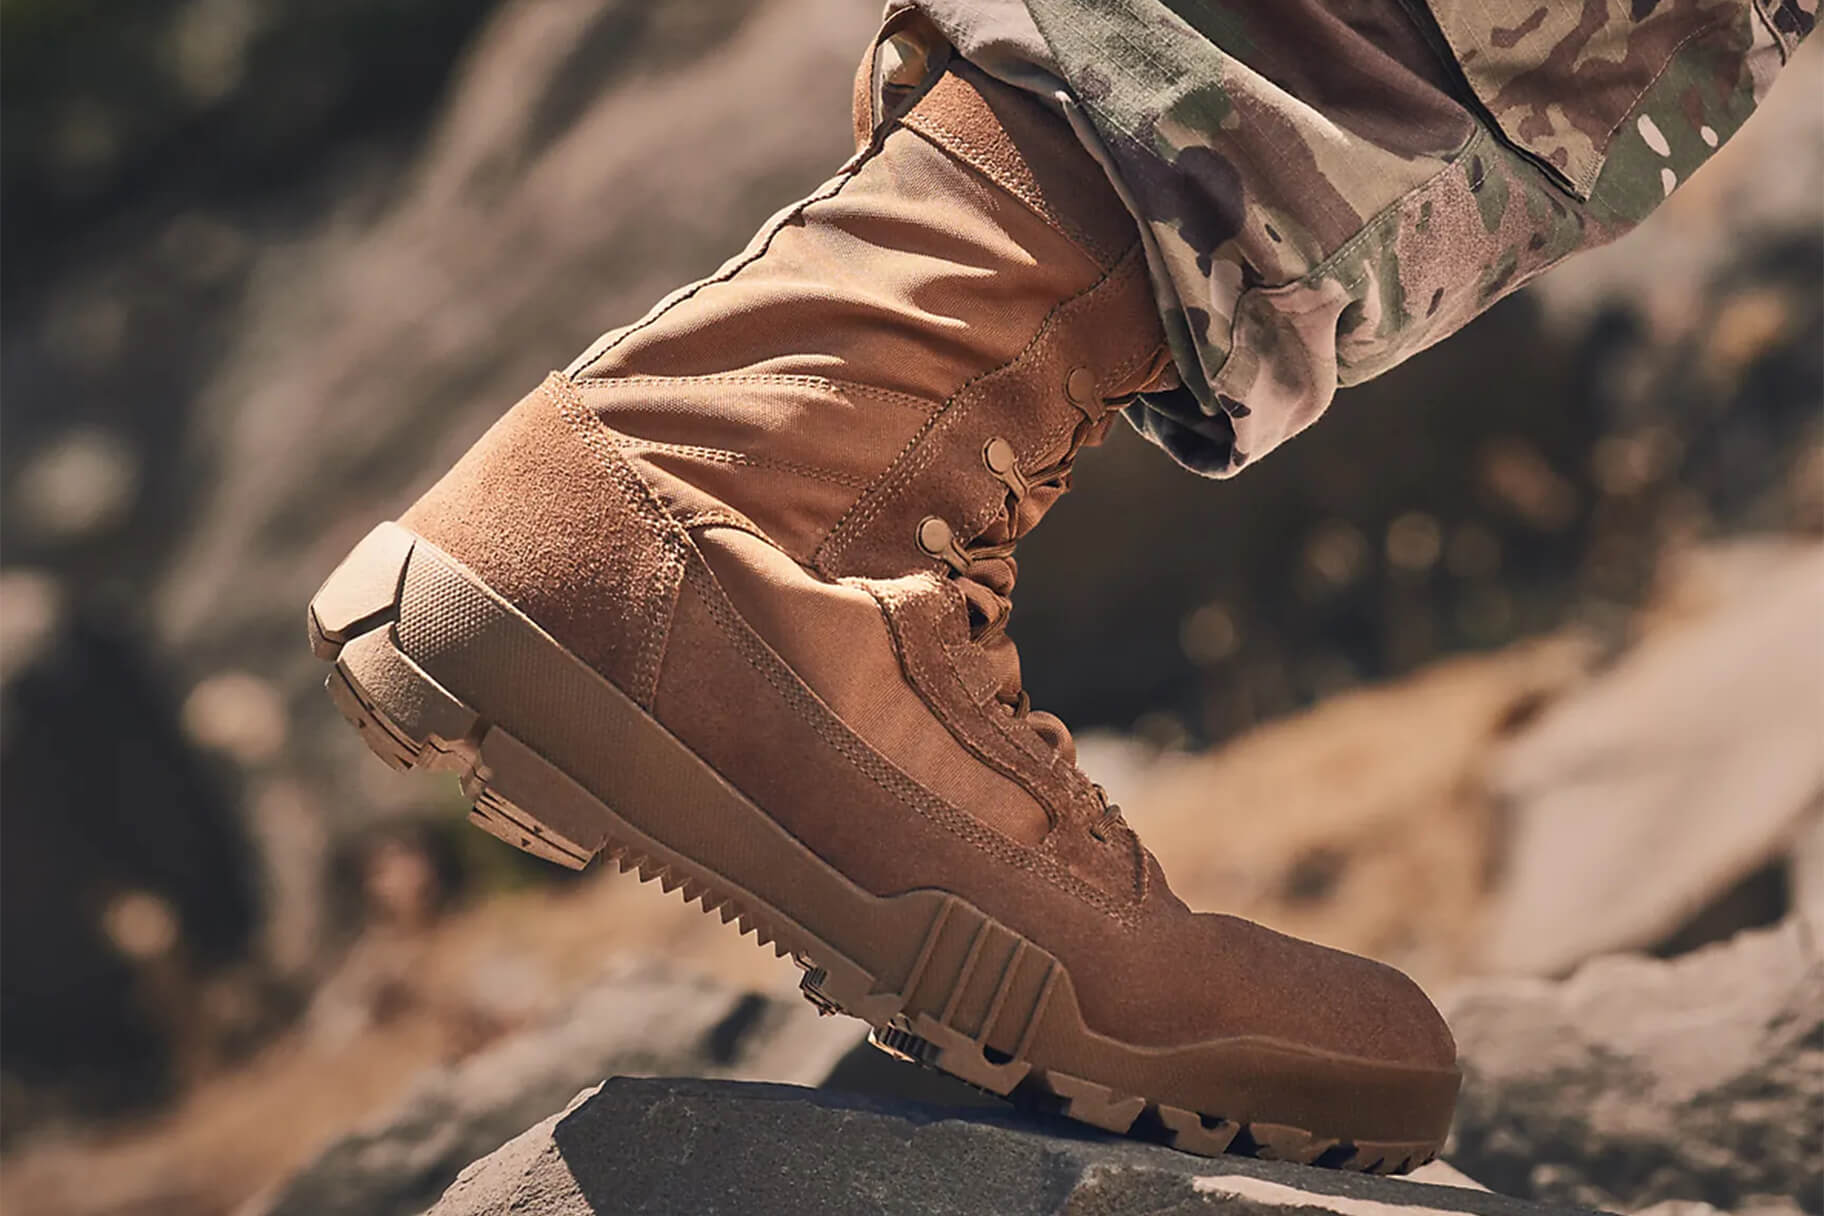 The Toughest Tactical Boots to Buy From Nike 